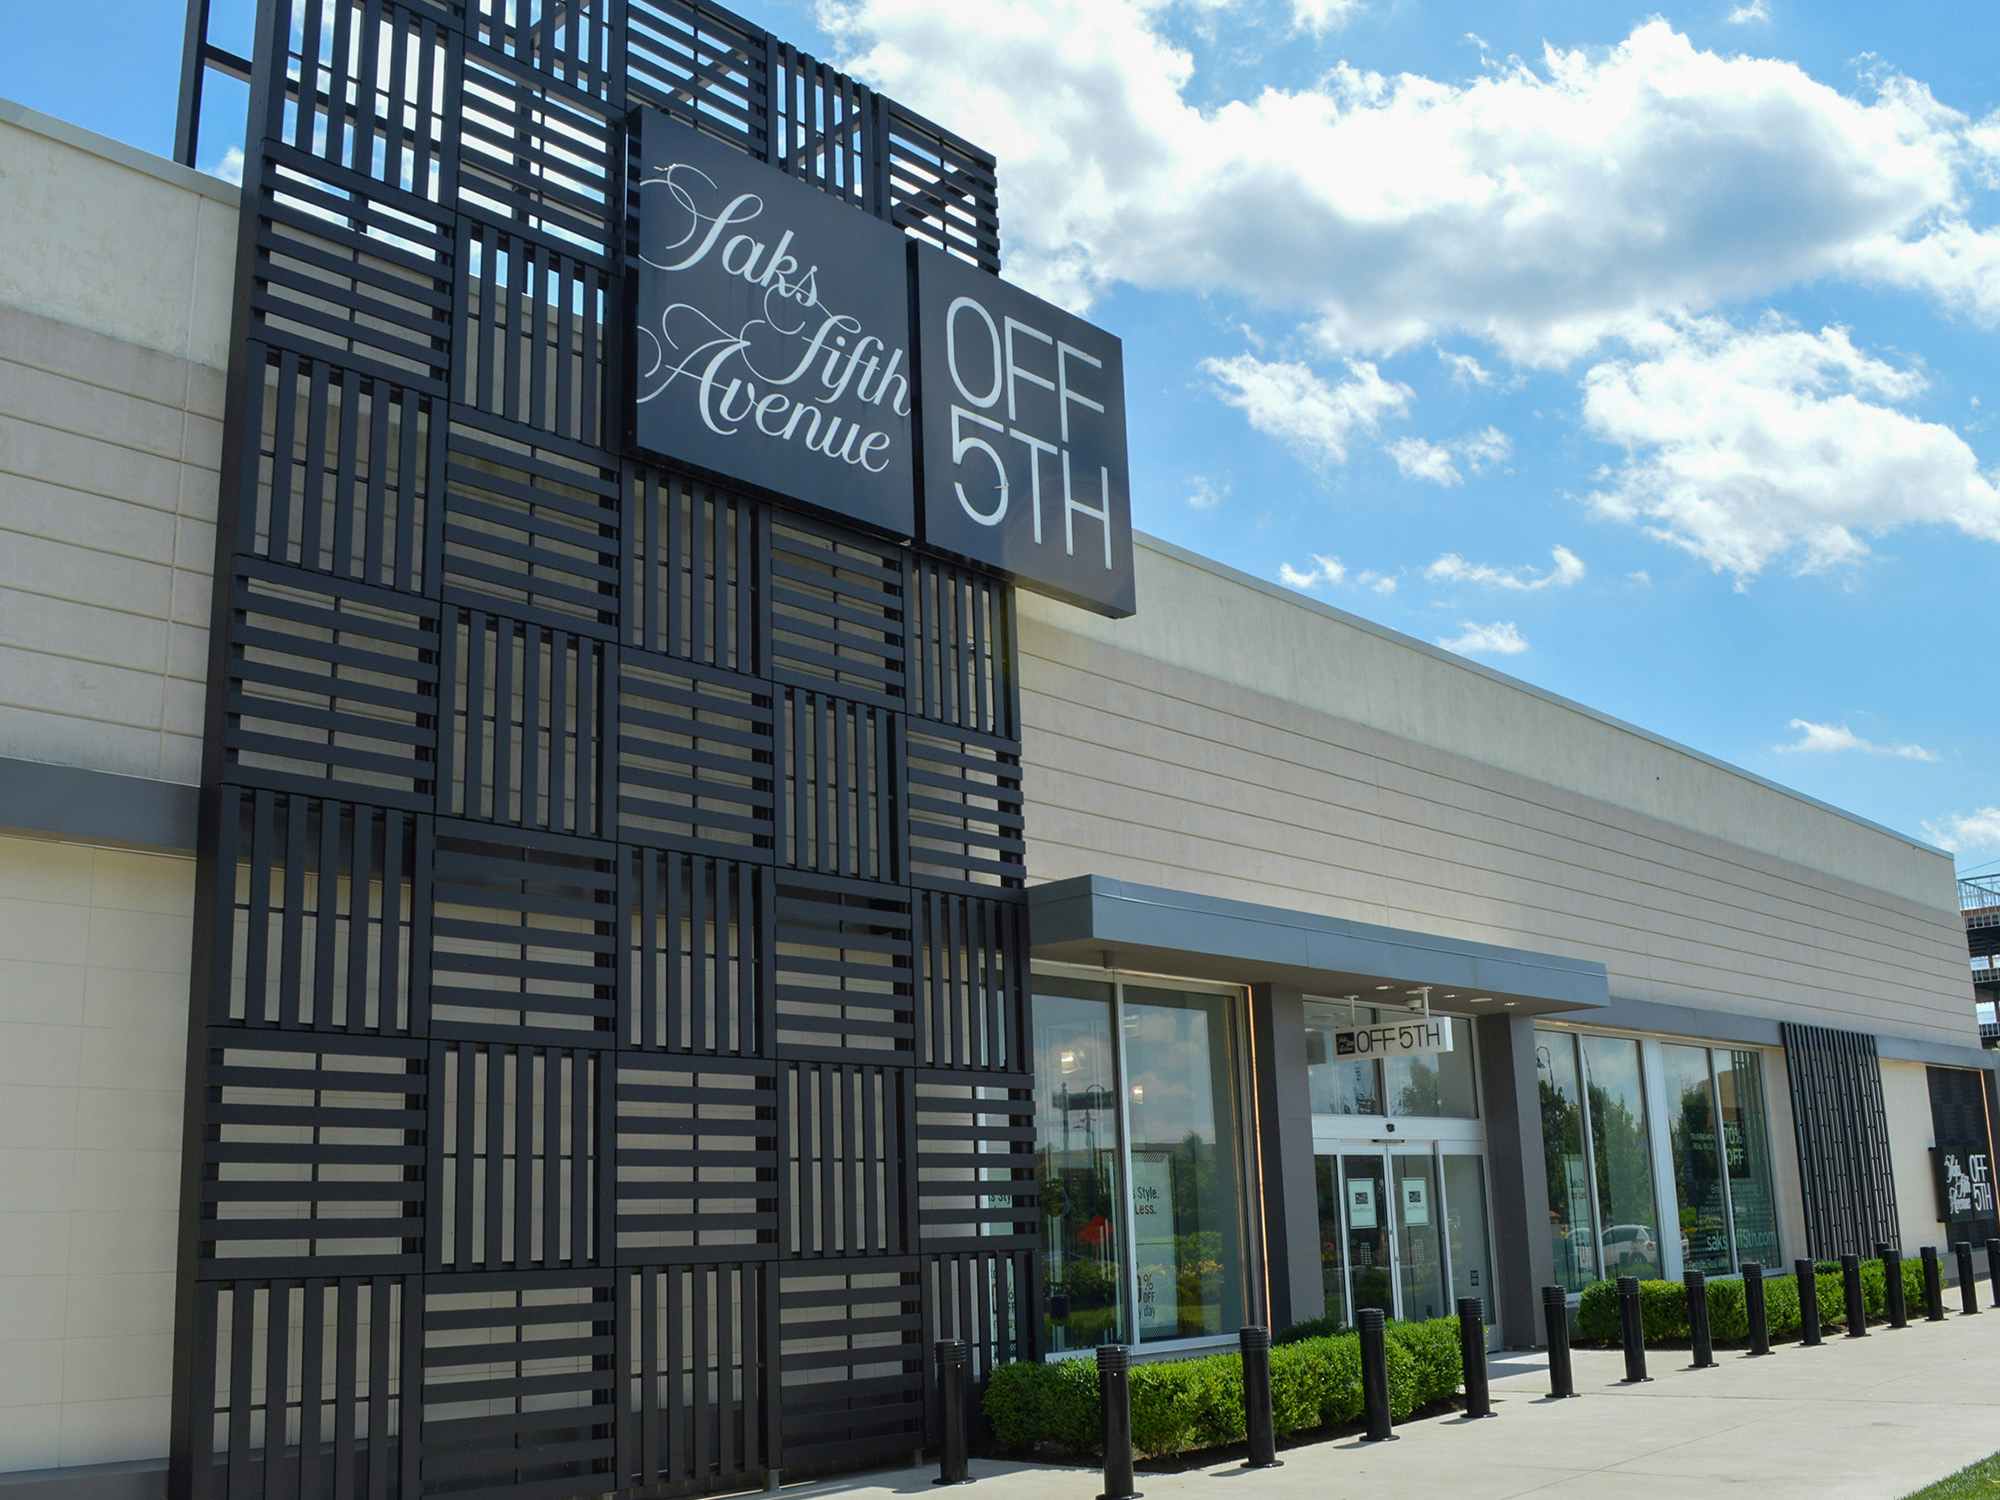 The exterior and sign of a Saks Fifth Avenue Off 5th store